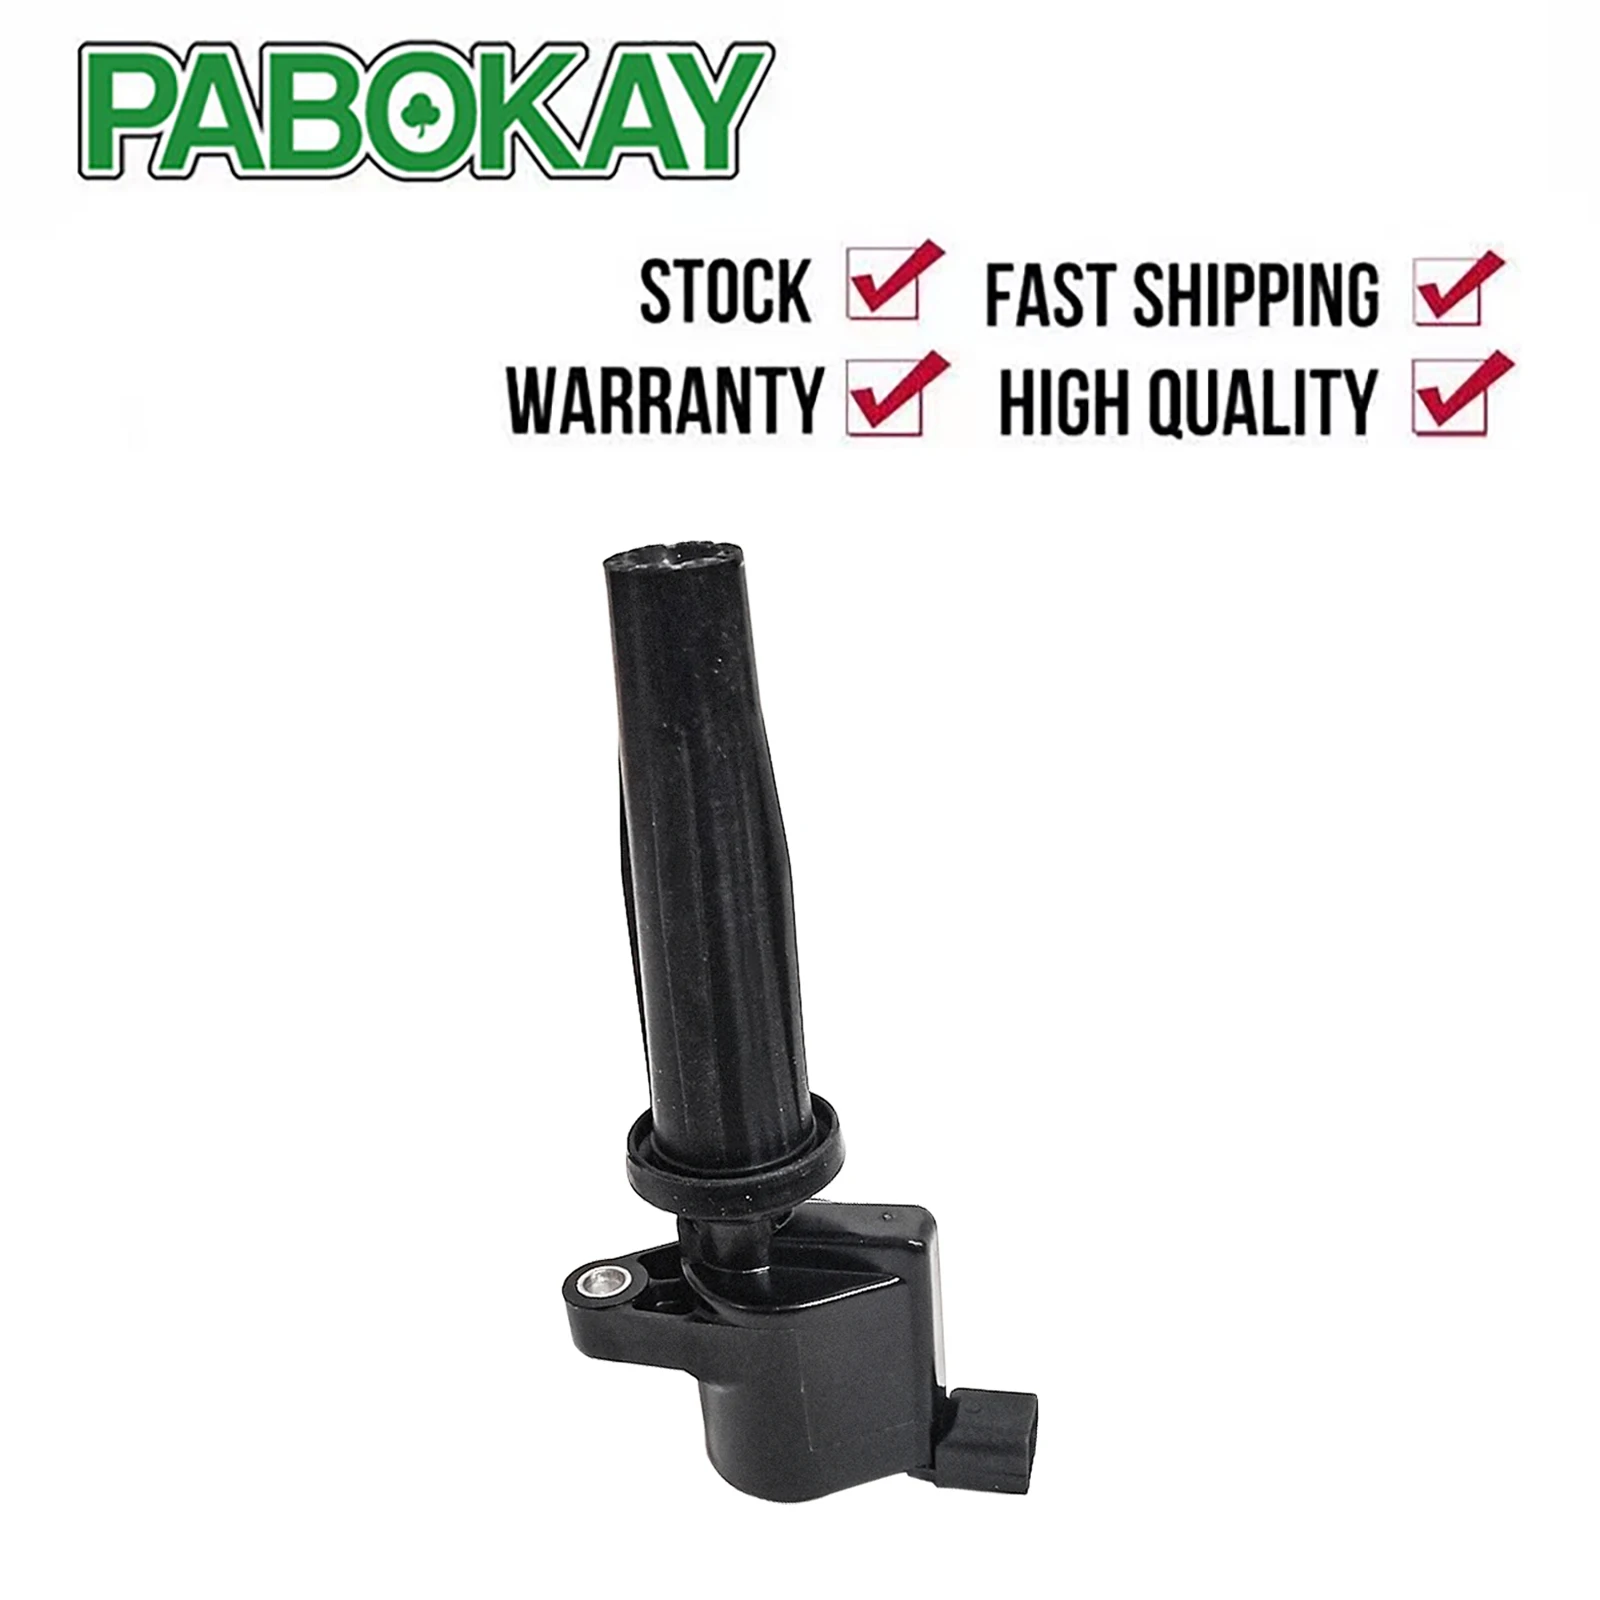 

Ignition Coil FOR FORD Focus Mondeo MAZDA 3 VOLVO C30 S40 V50 LF1618100 LF1618100A LF1618100B 30711786 1322402 IC18104 ZS408